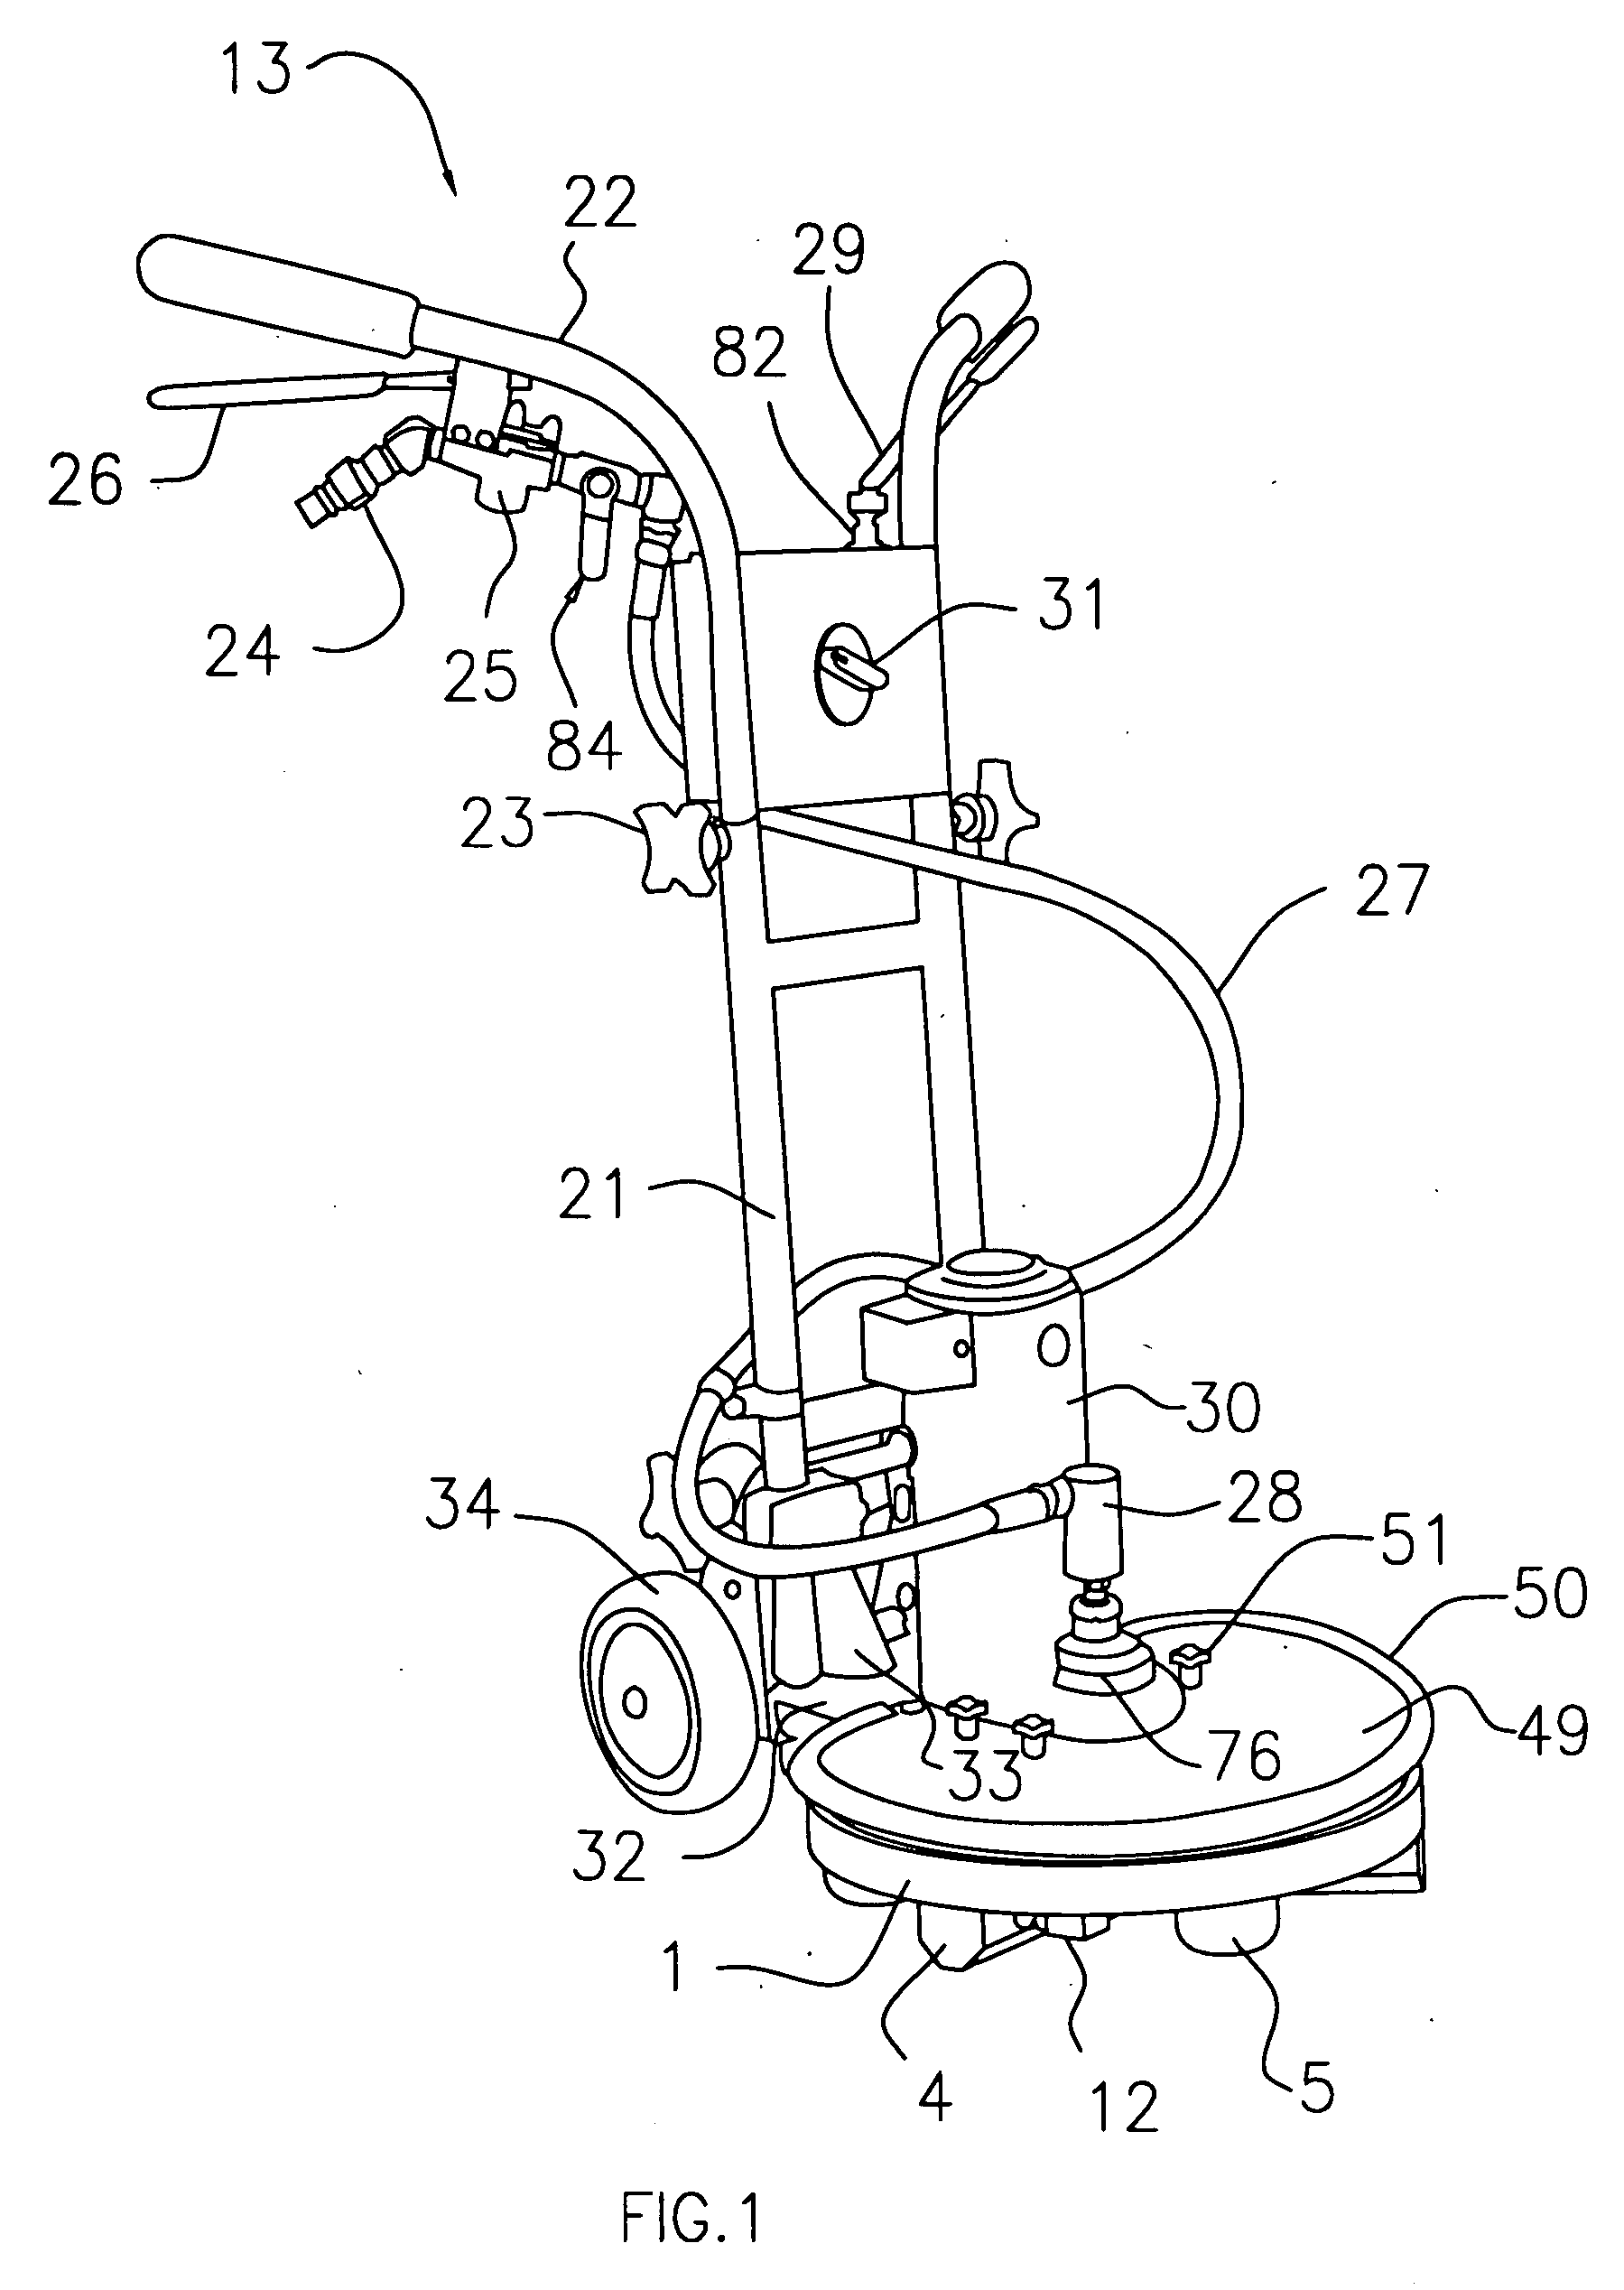 Rotary cleaning head